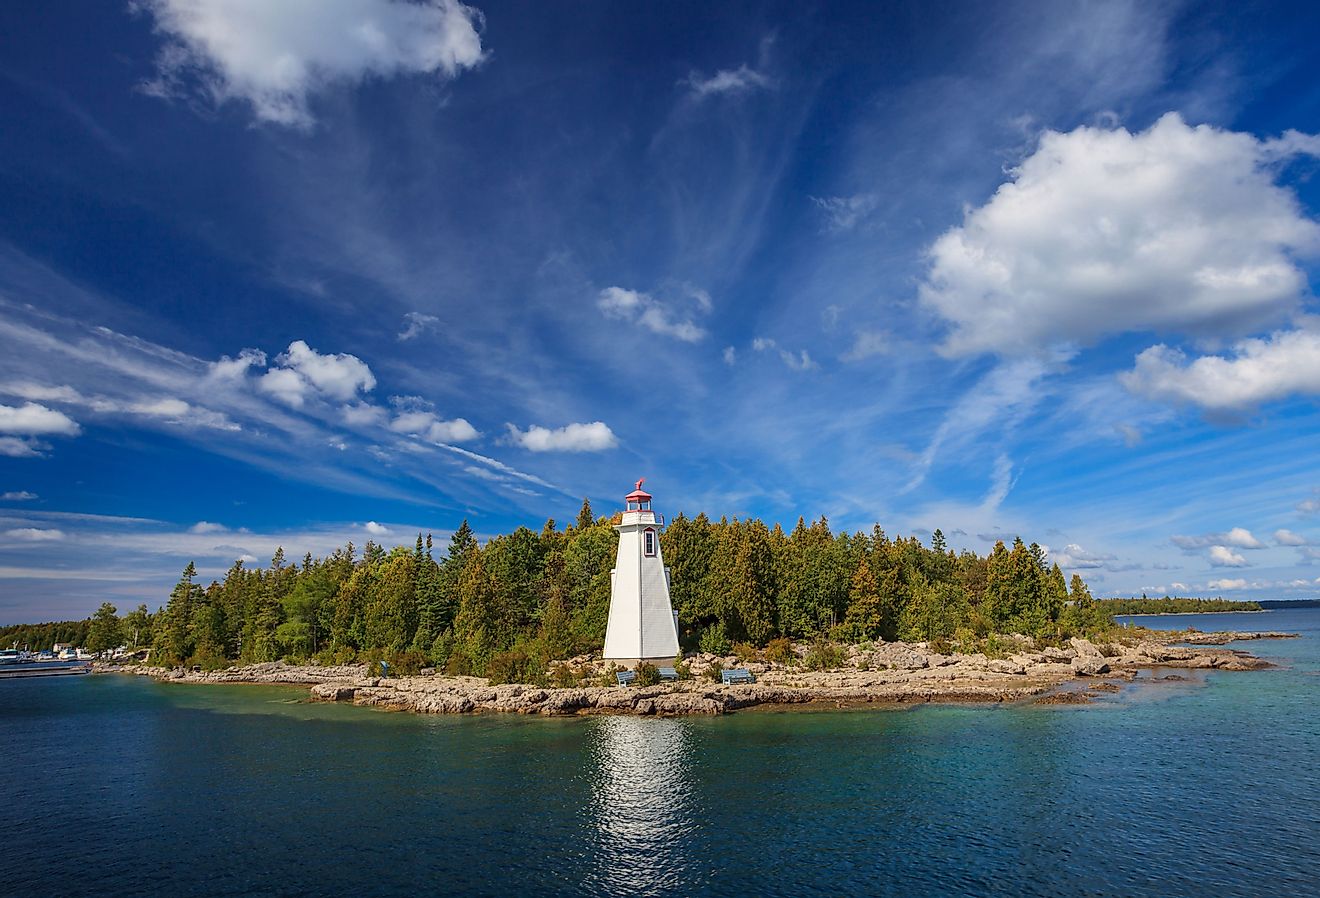 Big Tub Lighthouse located in the Bruce Peninsula of Tobermory, Ontario, Canada. Image credit studioloco via Shutterstock.